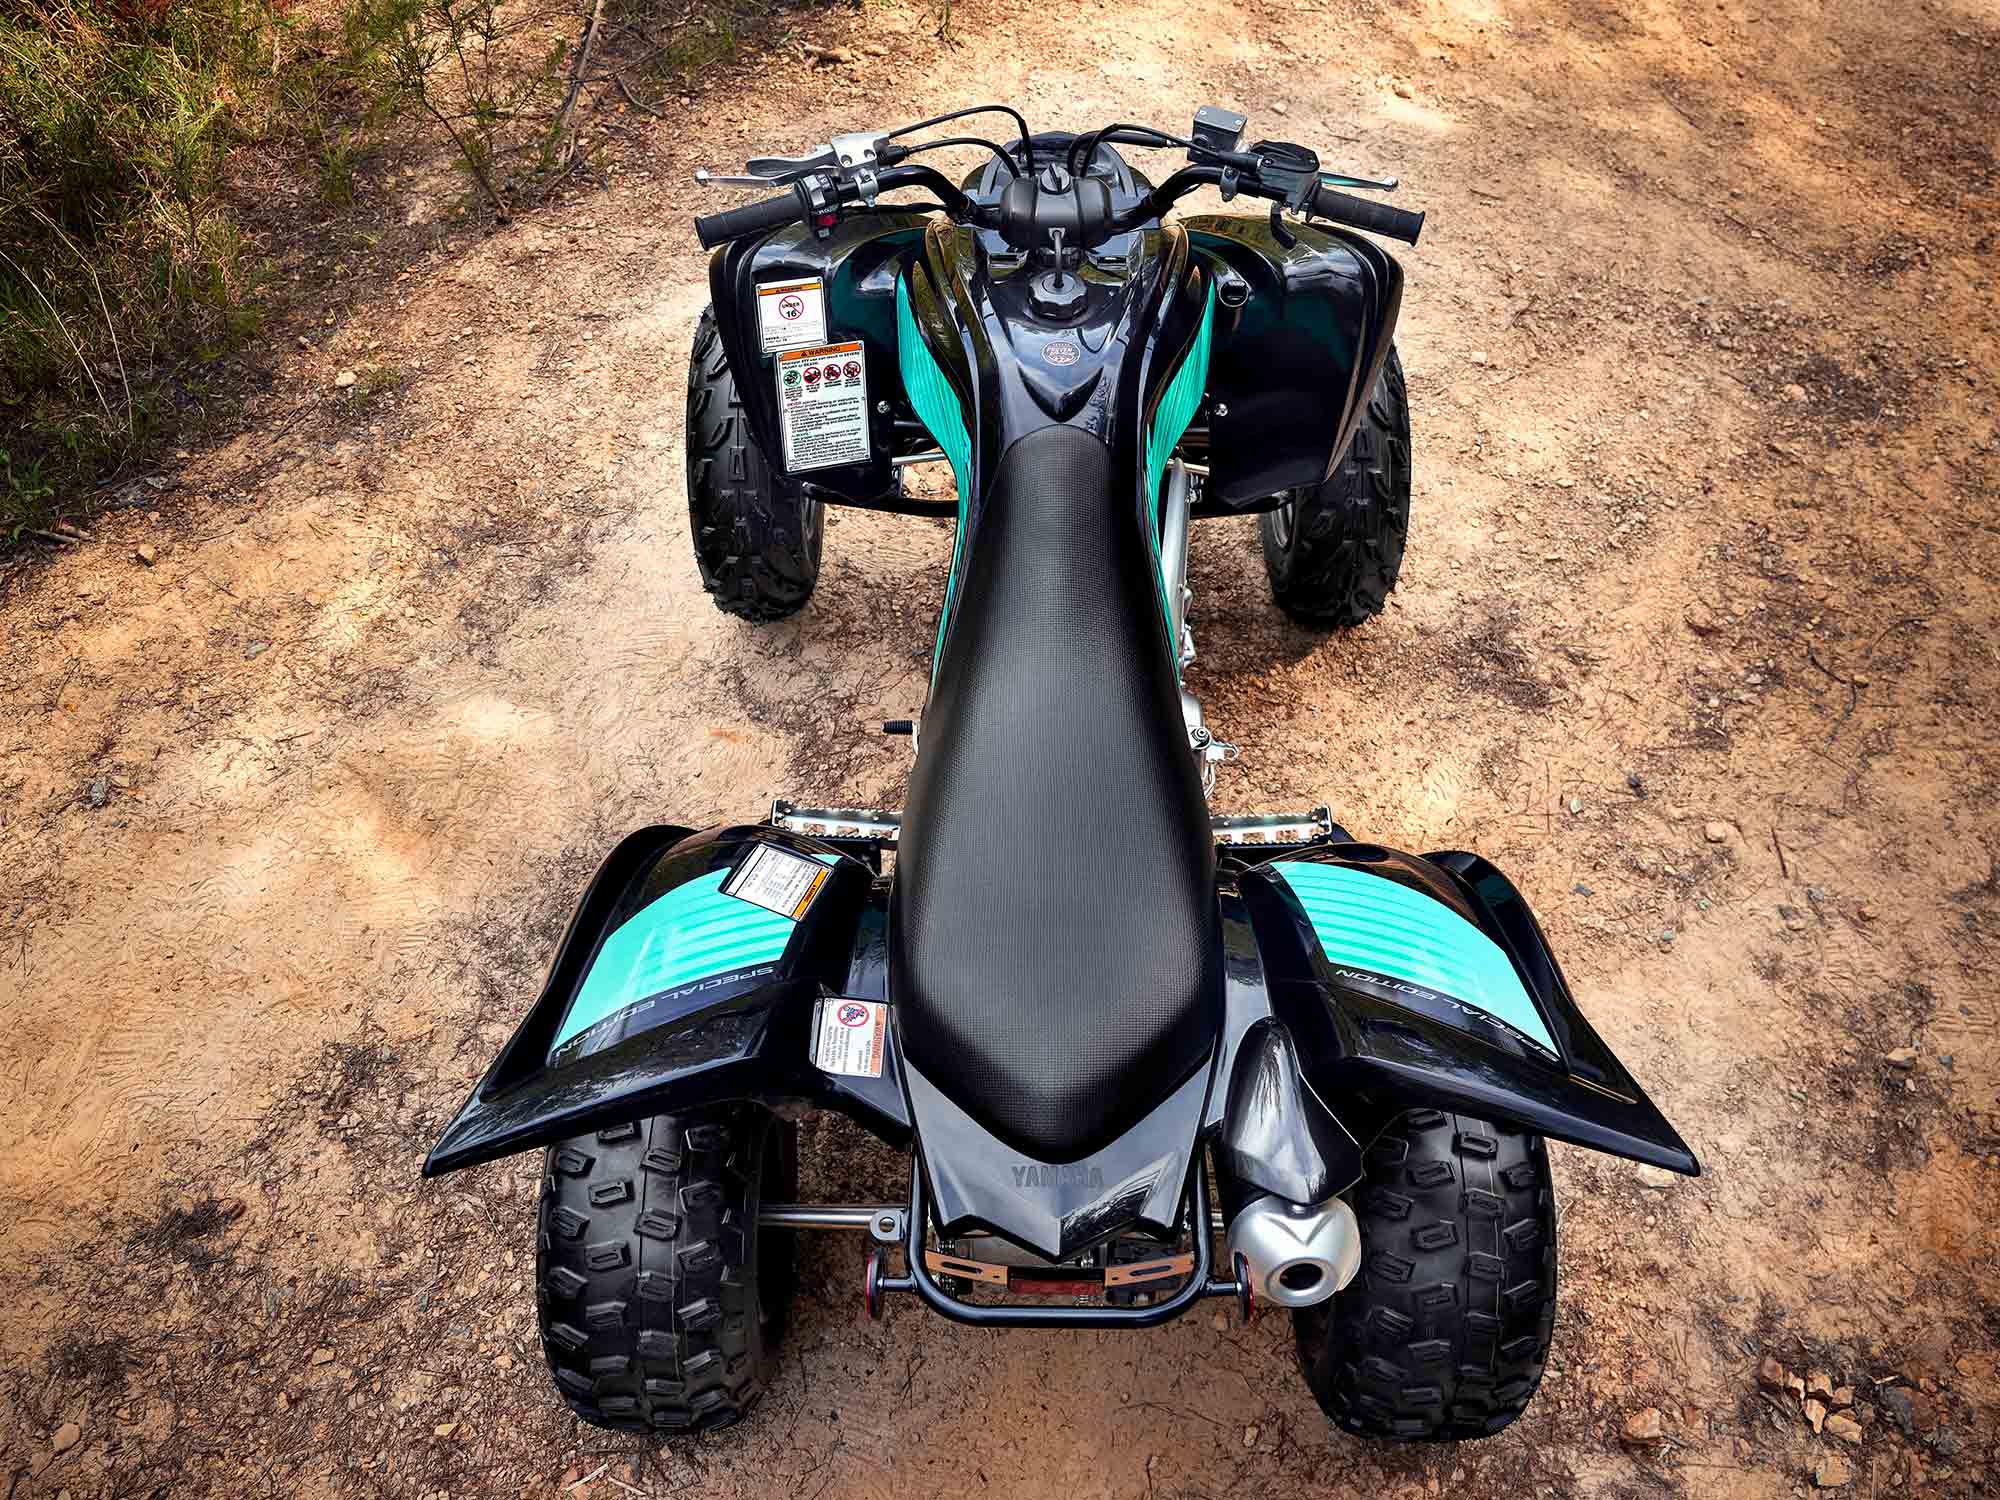 2022 Yamaha RAPTOR 700 Price, Color, Specs & Review 